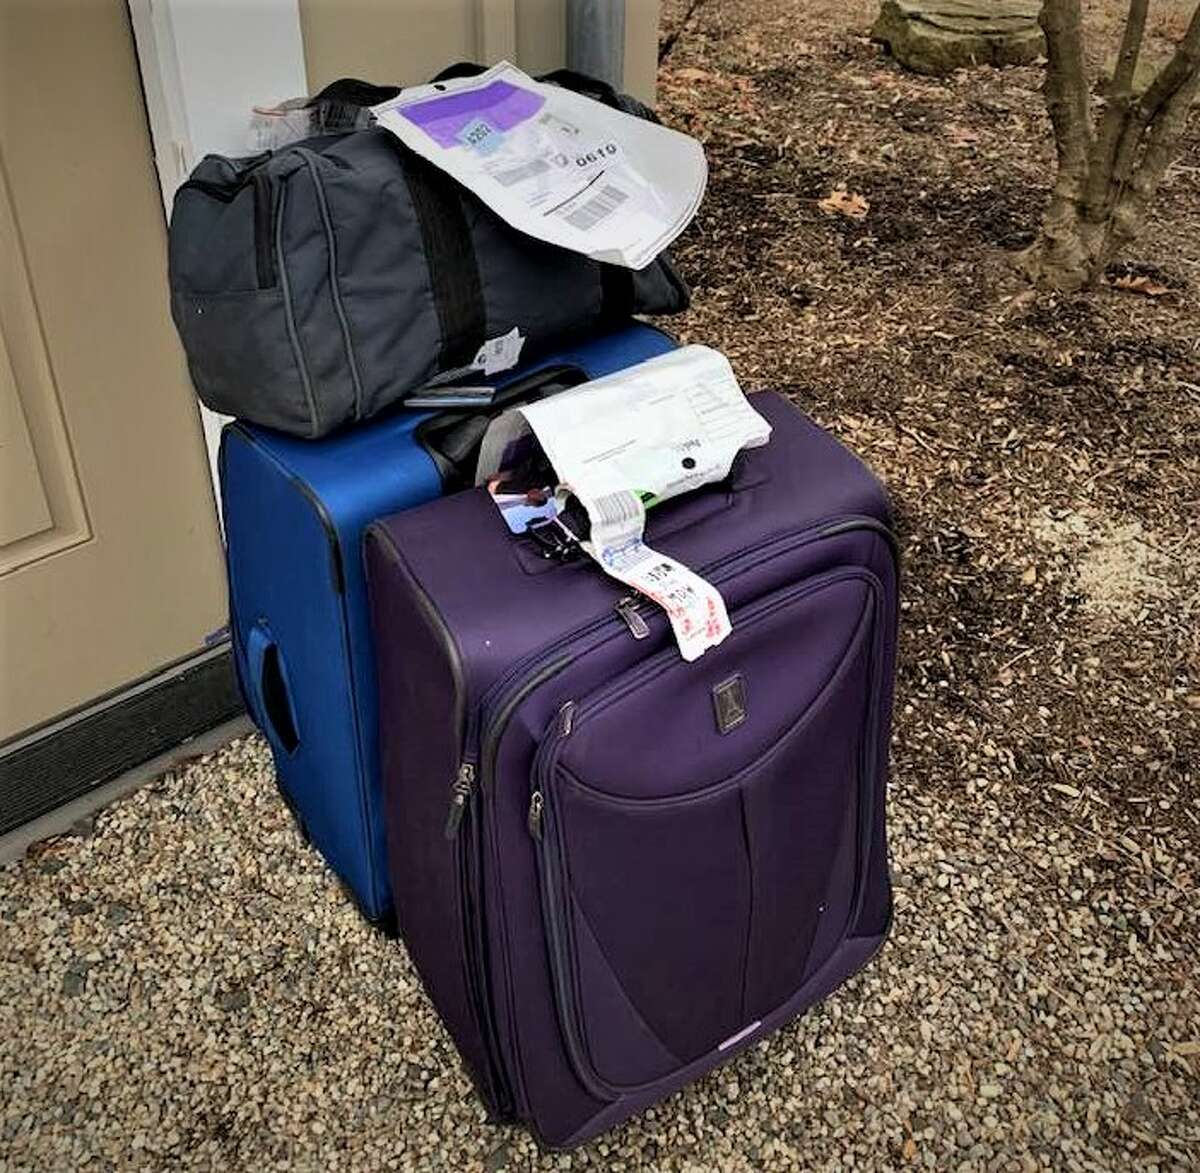 Karen Dugan of Glastonbury was able to track her lost luggage's travels across America, thanks to Apple AirTags. 